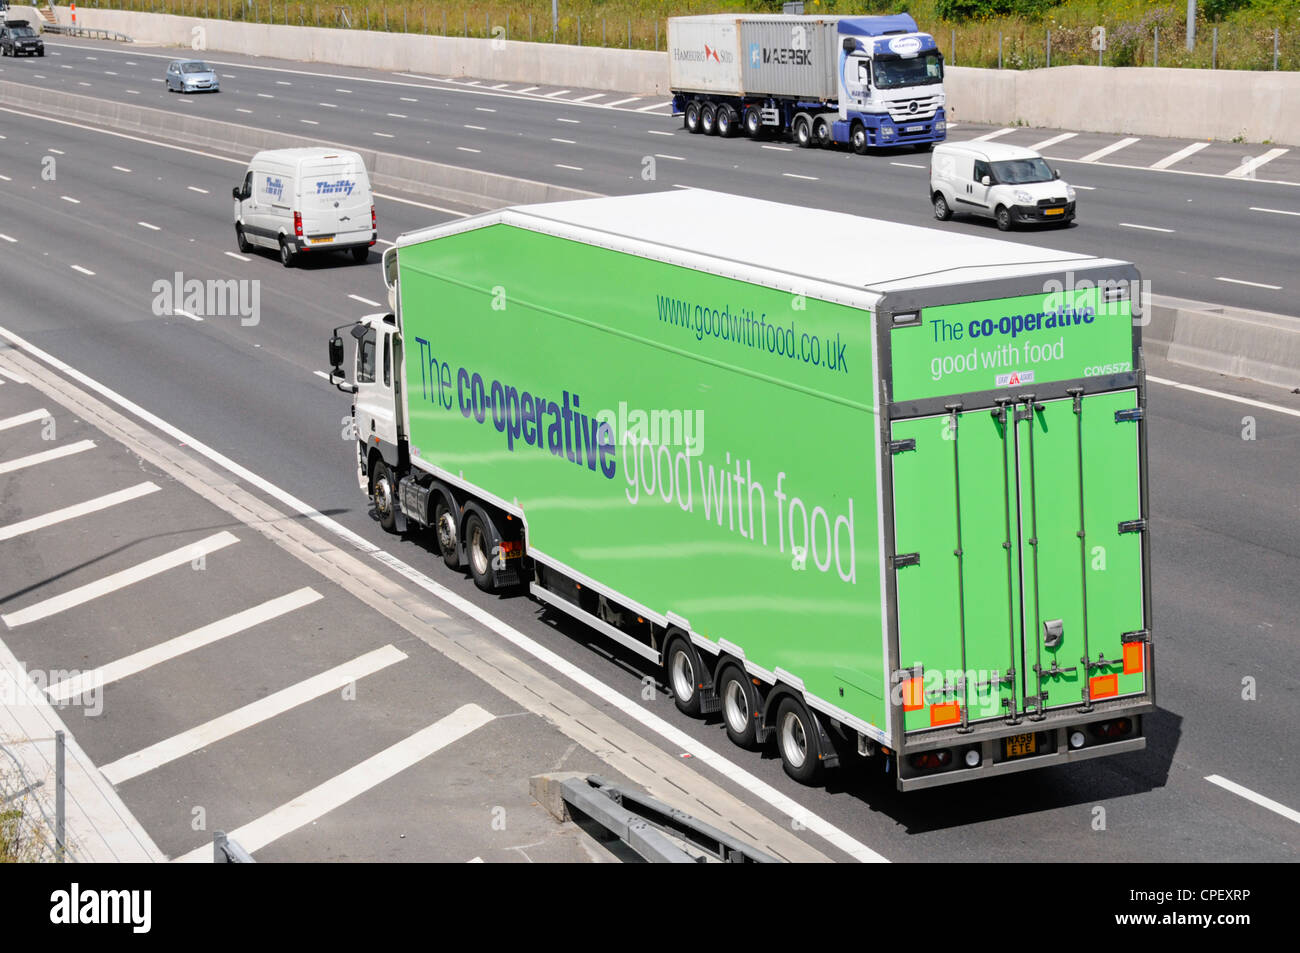 Co op food supply chain articulated delivery trailer & hgv lorry truck used for food distribution to co operative supermarket stores on UK motorway Stock Photo